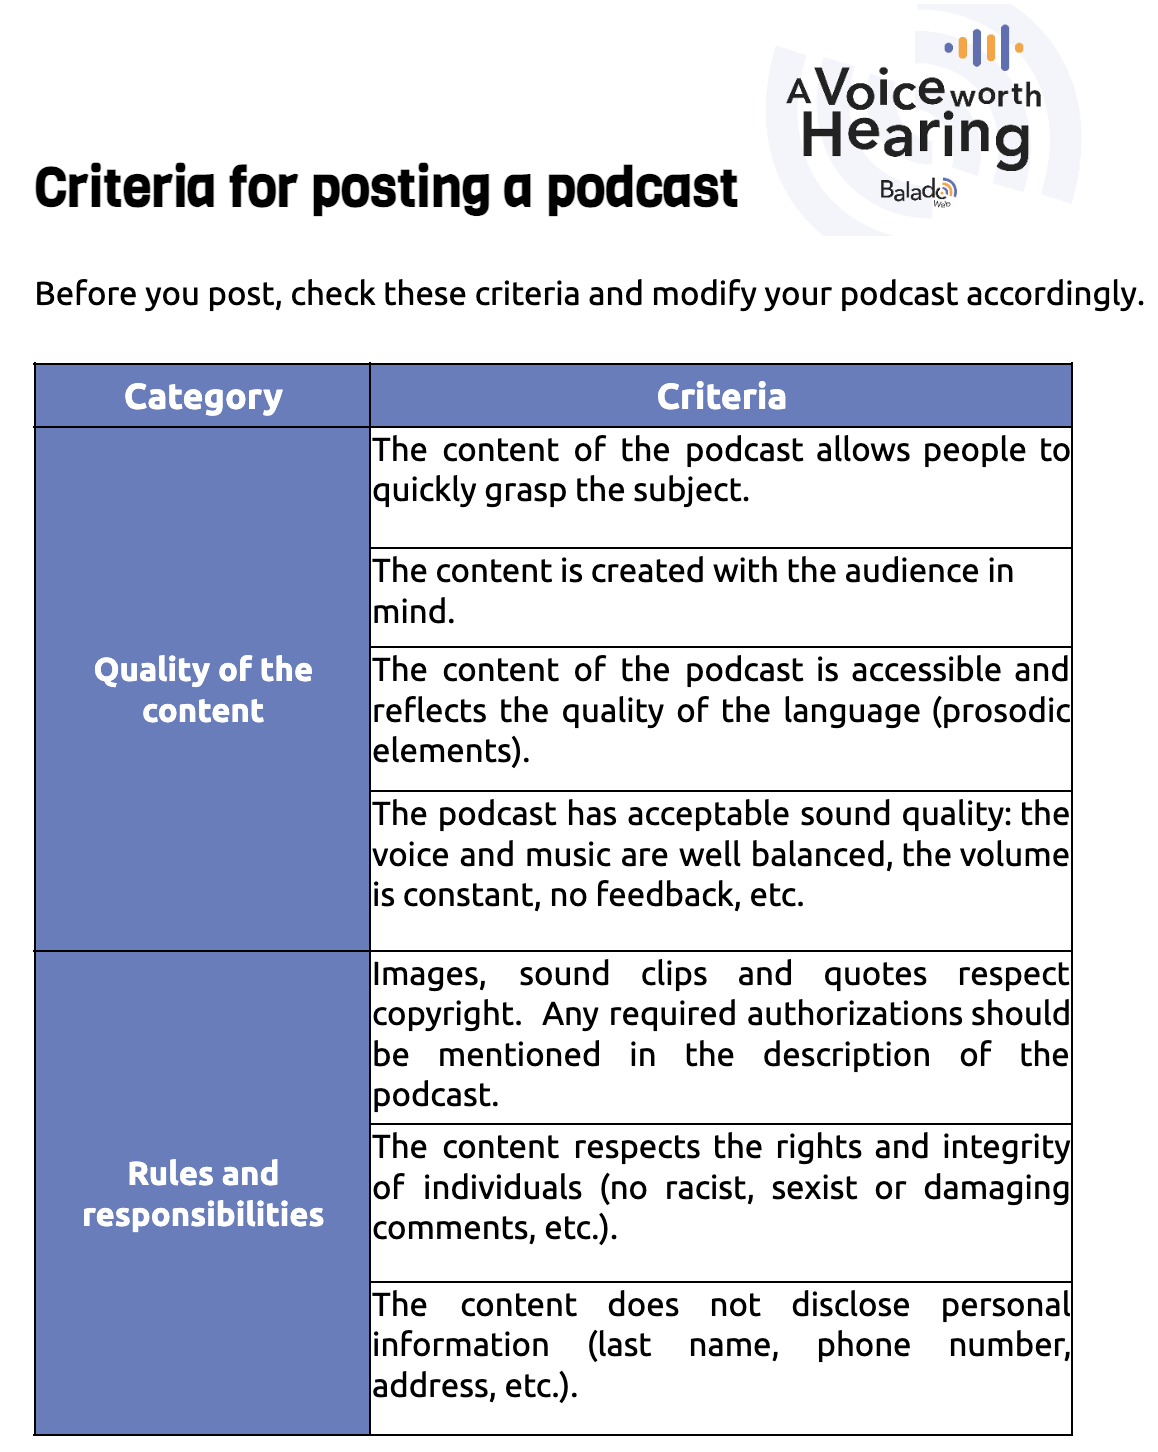 Criteria for posting podcasts